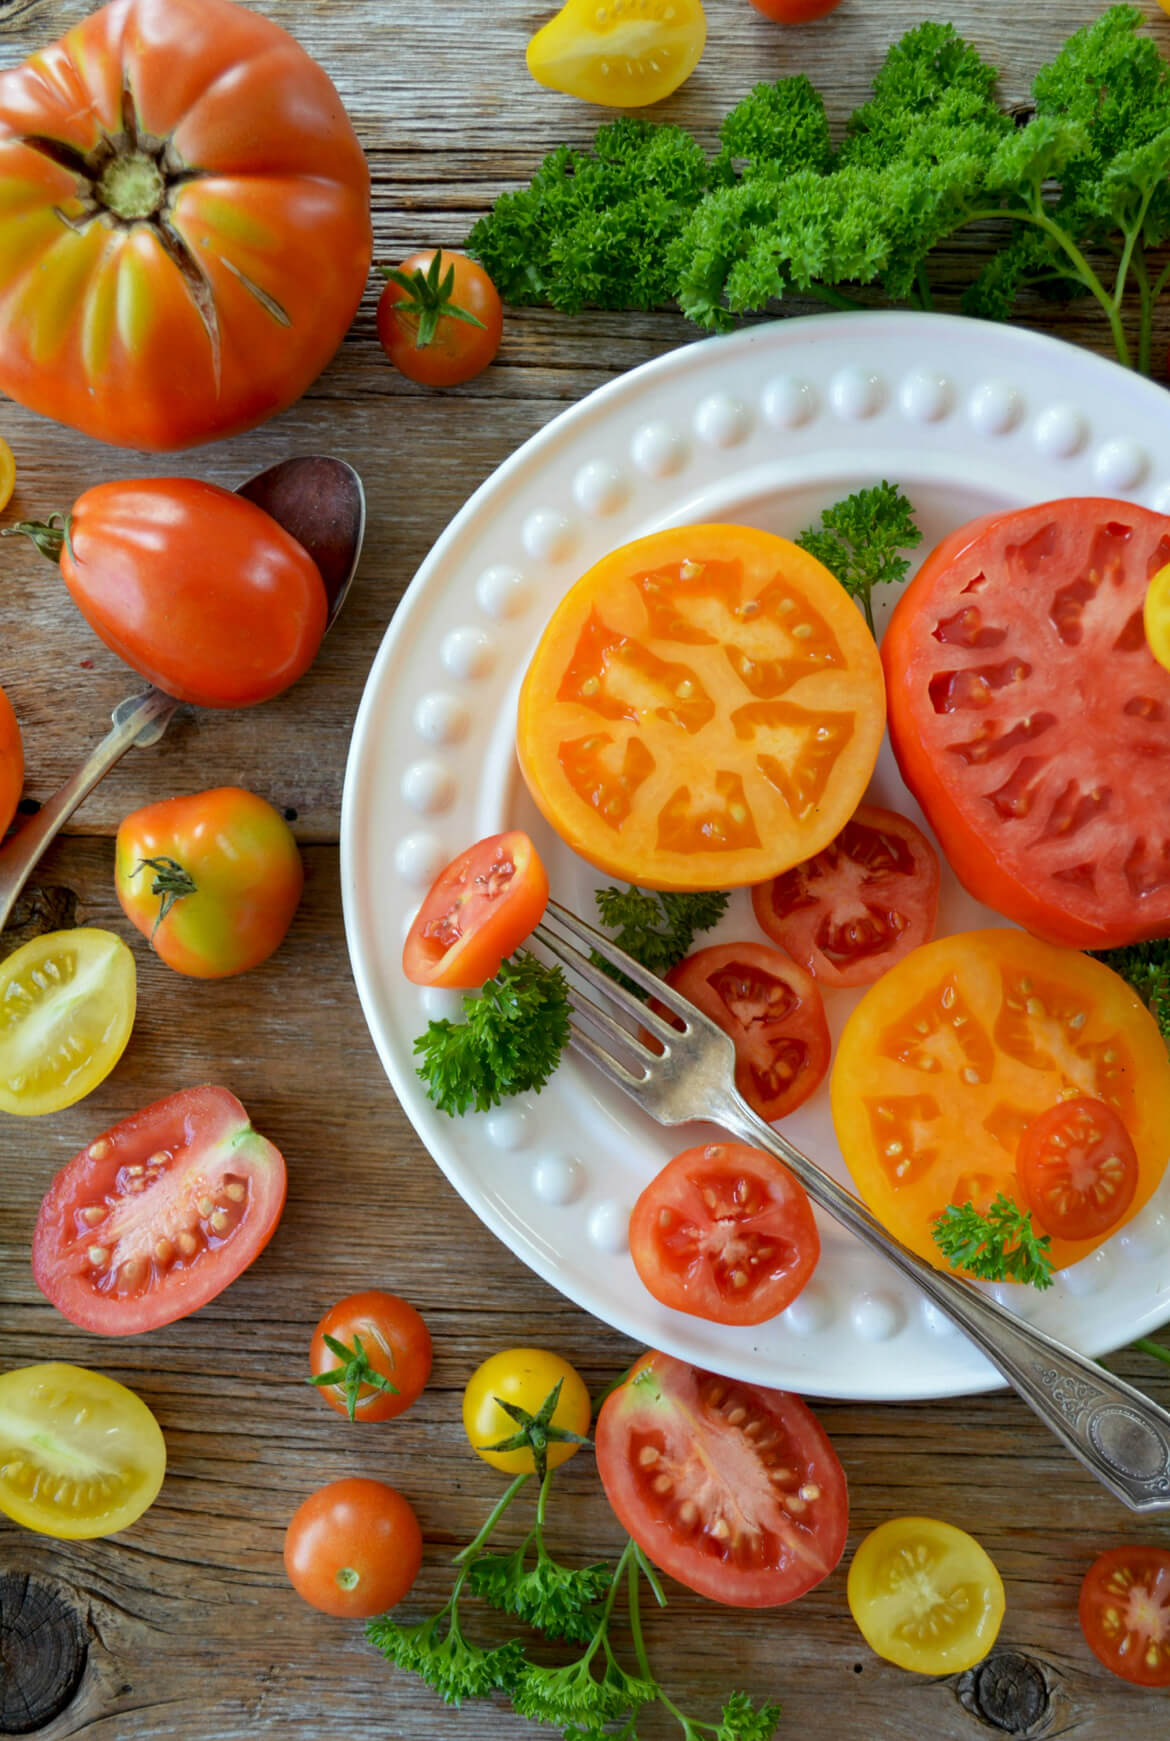 Cooking With Tomatoes